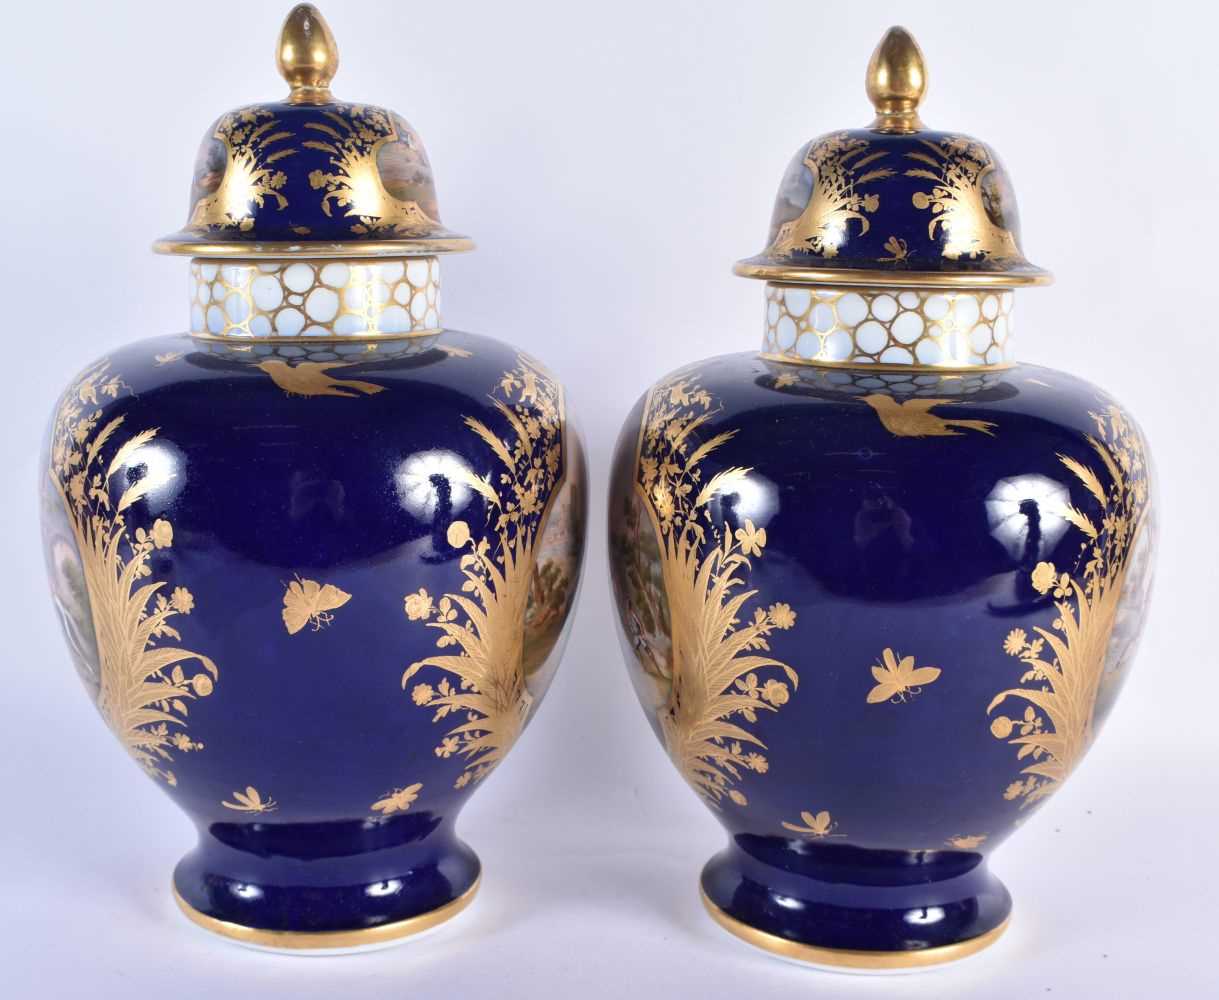 A LARGE PAIR OF 19TH CENTURY GERMAN DRESDEN PORCELAIN VASES AND COVERS painted with fighting - Image 2 of 5